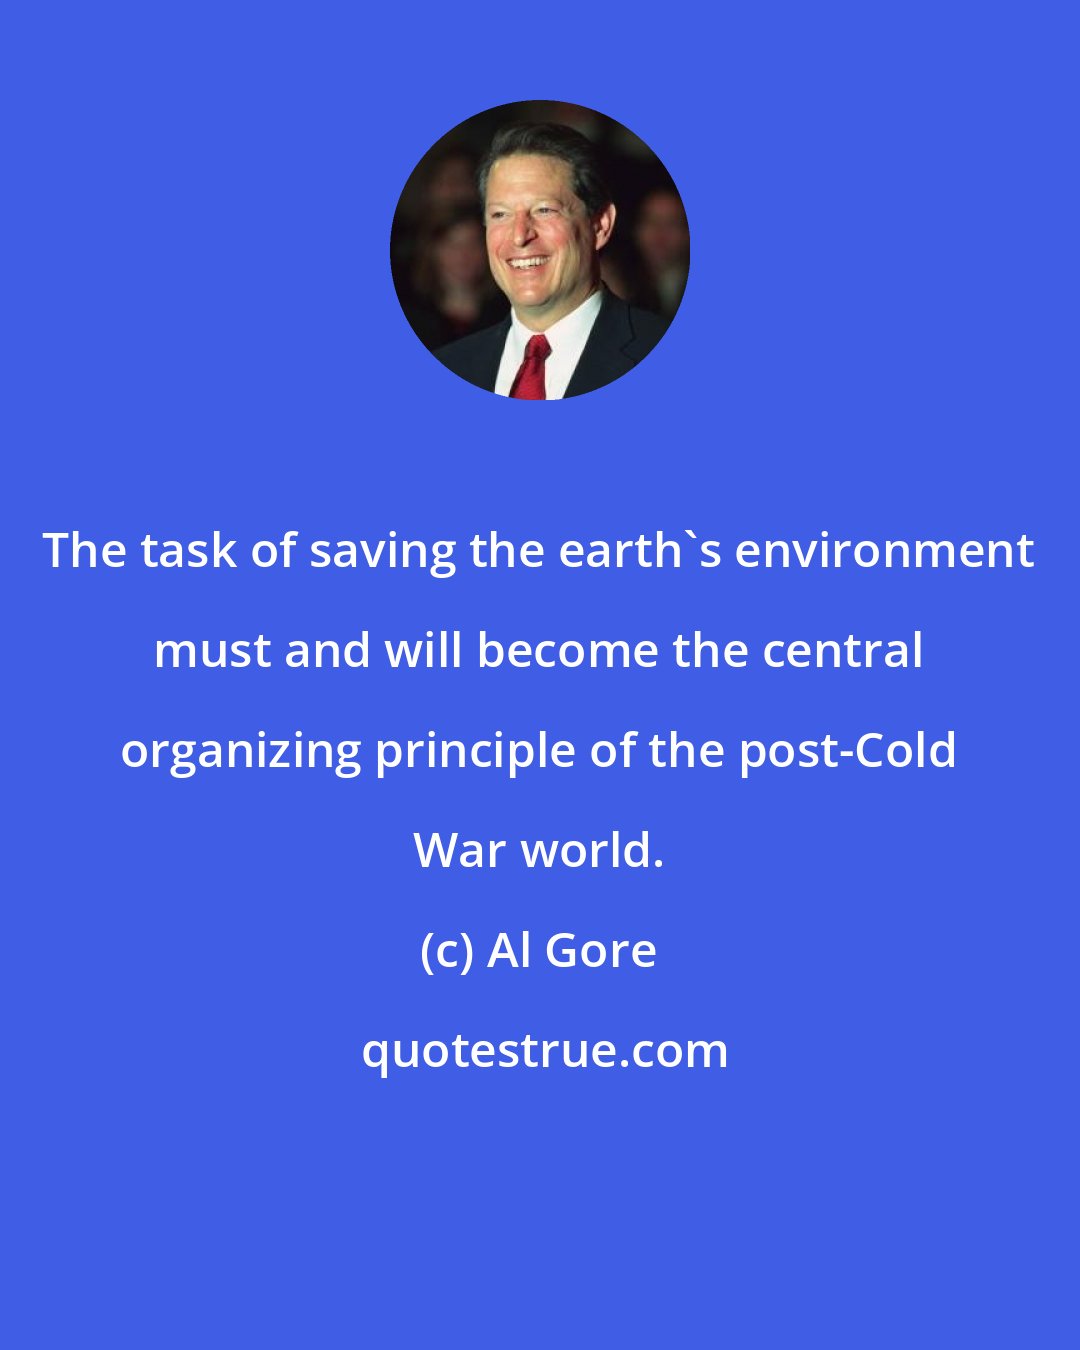 Al Gore: The task of saving the earth's environment must and will become the central organizing principle of the post-Cold War world.